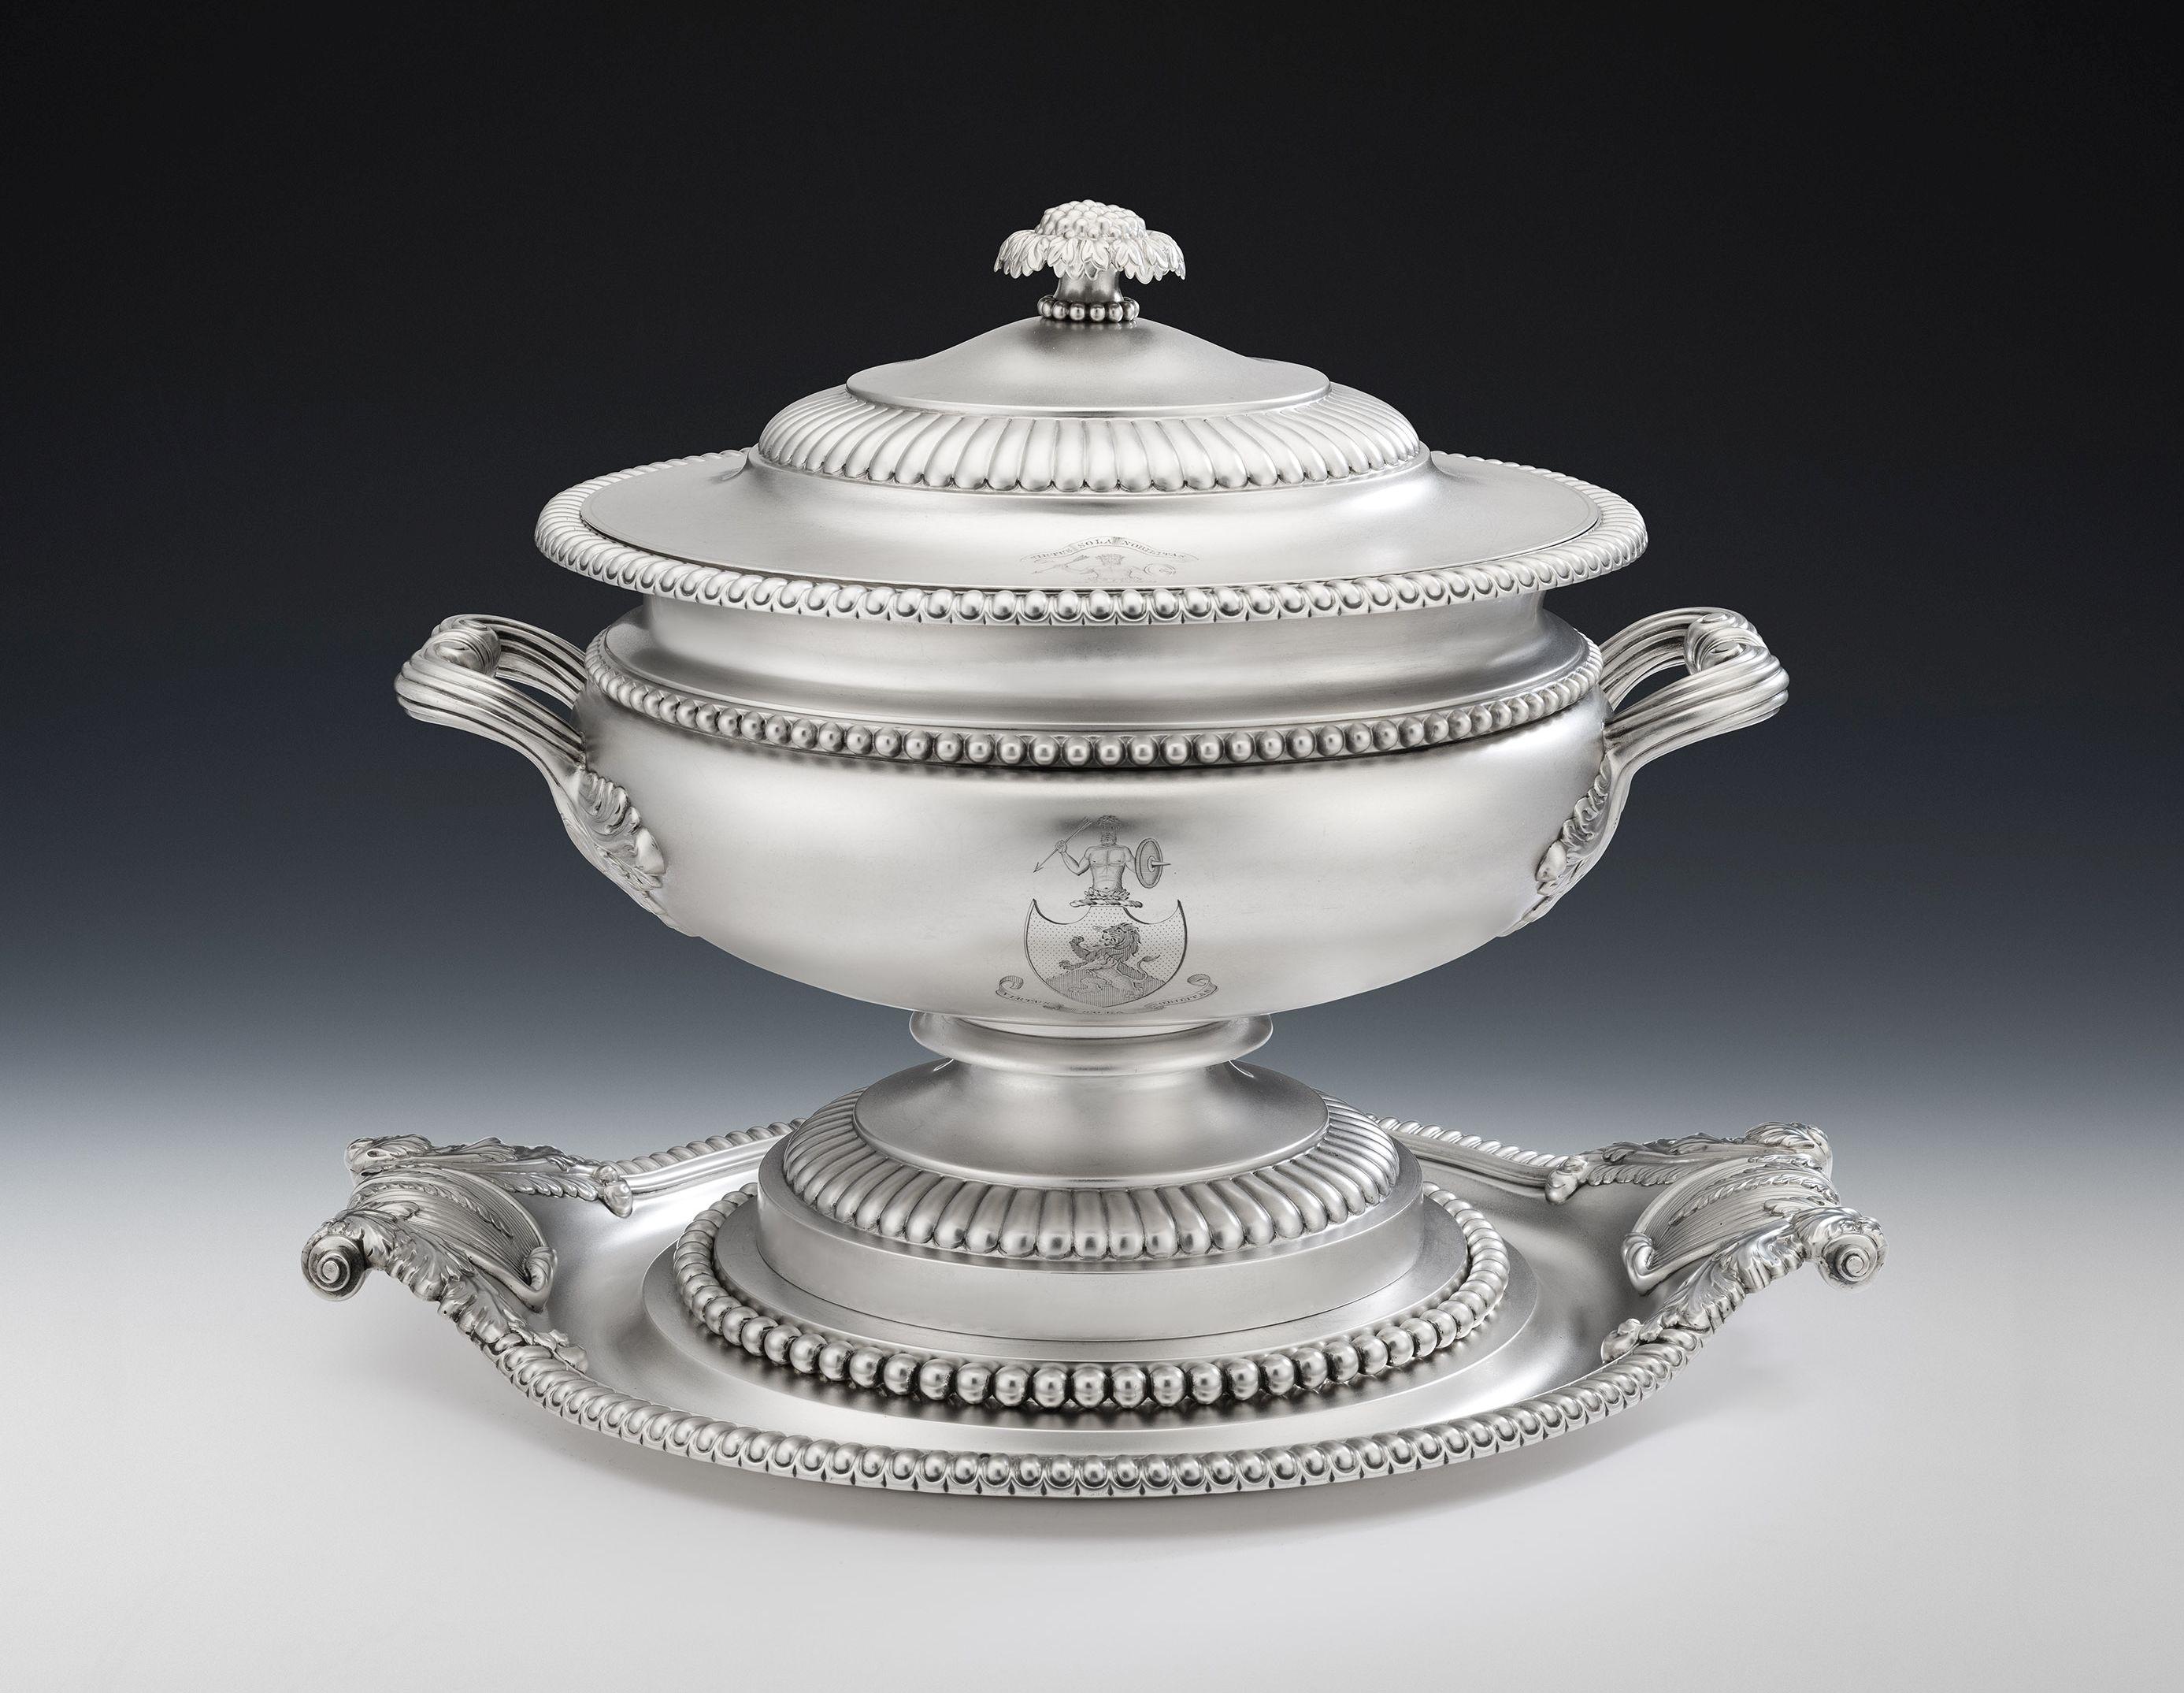 This highly important and very unusual antique sterling silver, Tureen, stand and cover was made in Birmingham in 1811 by Matthew Boulton, one of the most important of the British Georgian Silversmiths. The large Tureen stands on a circular pedestal